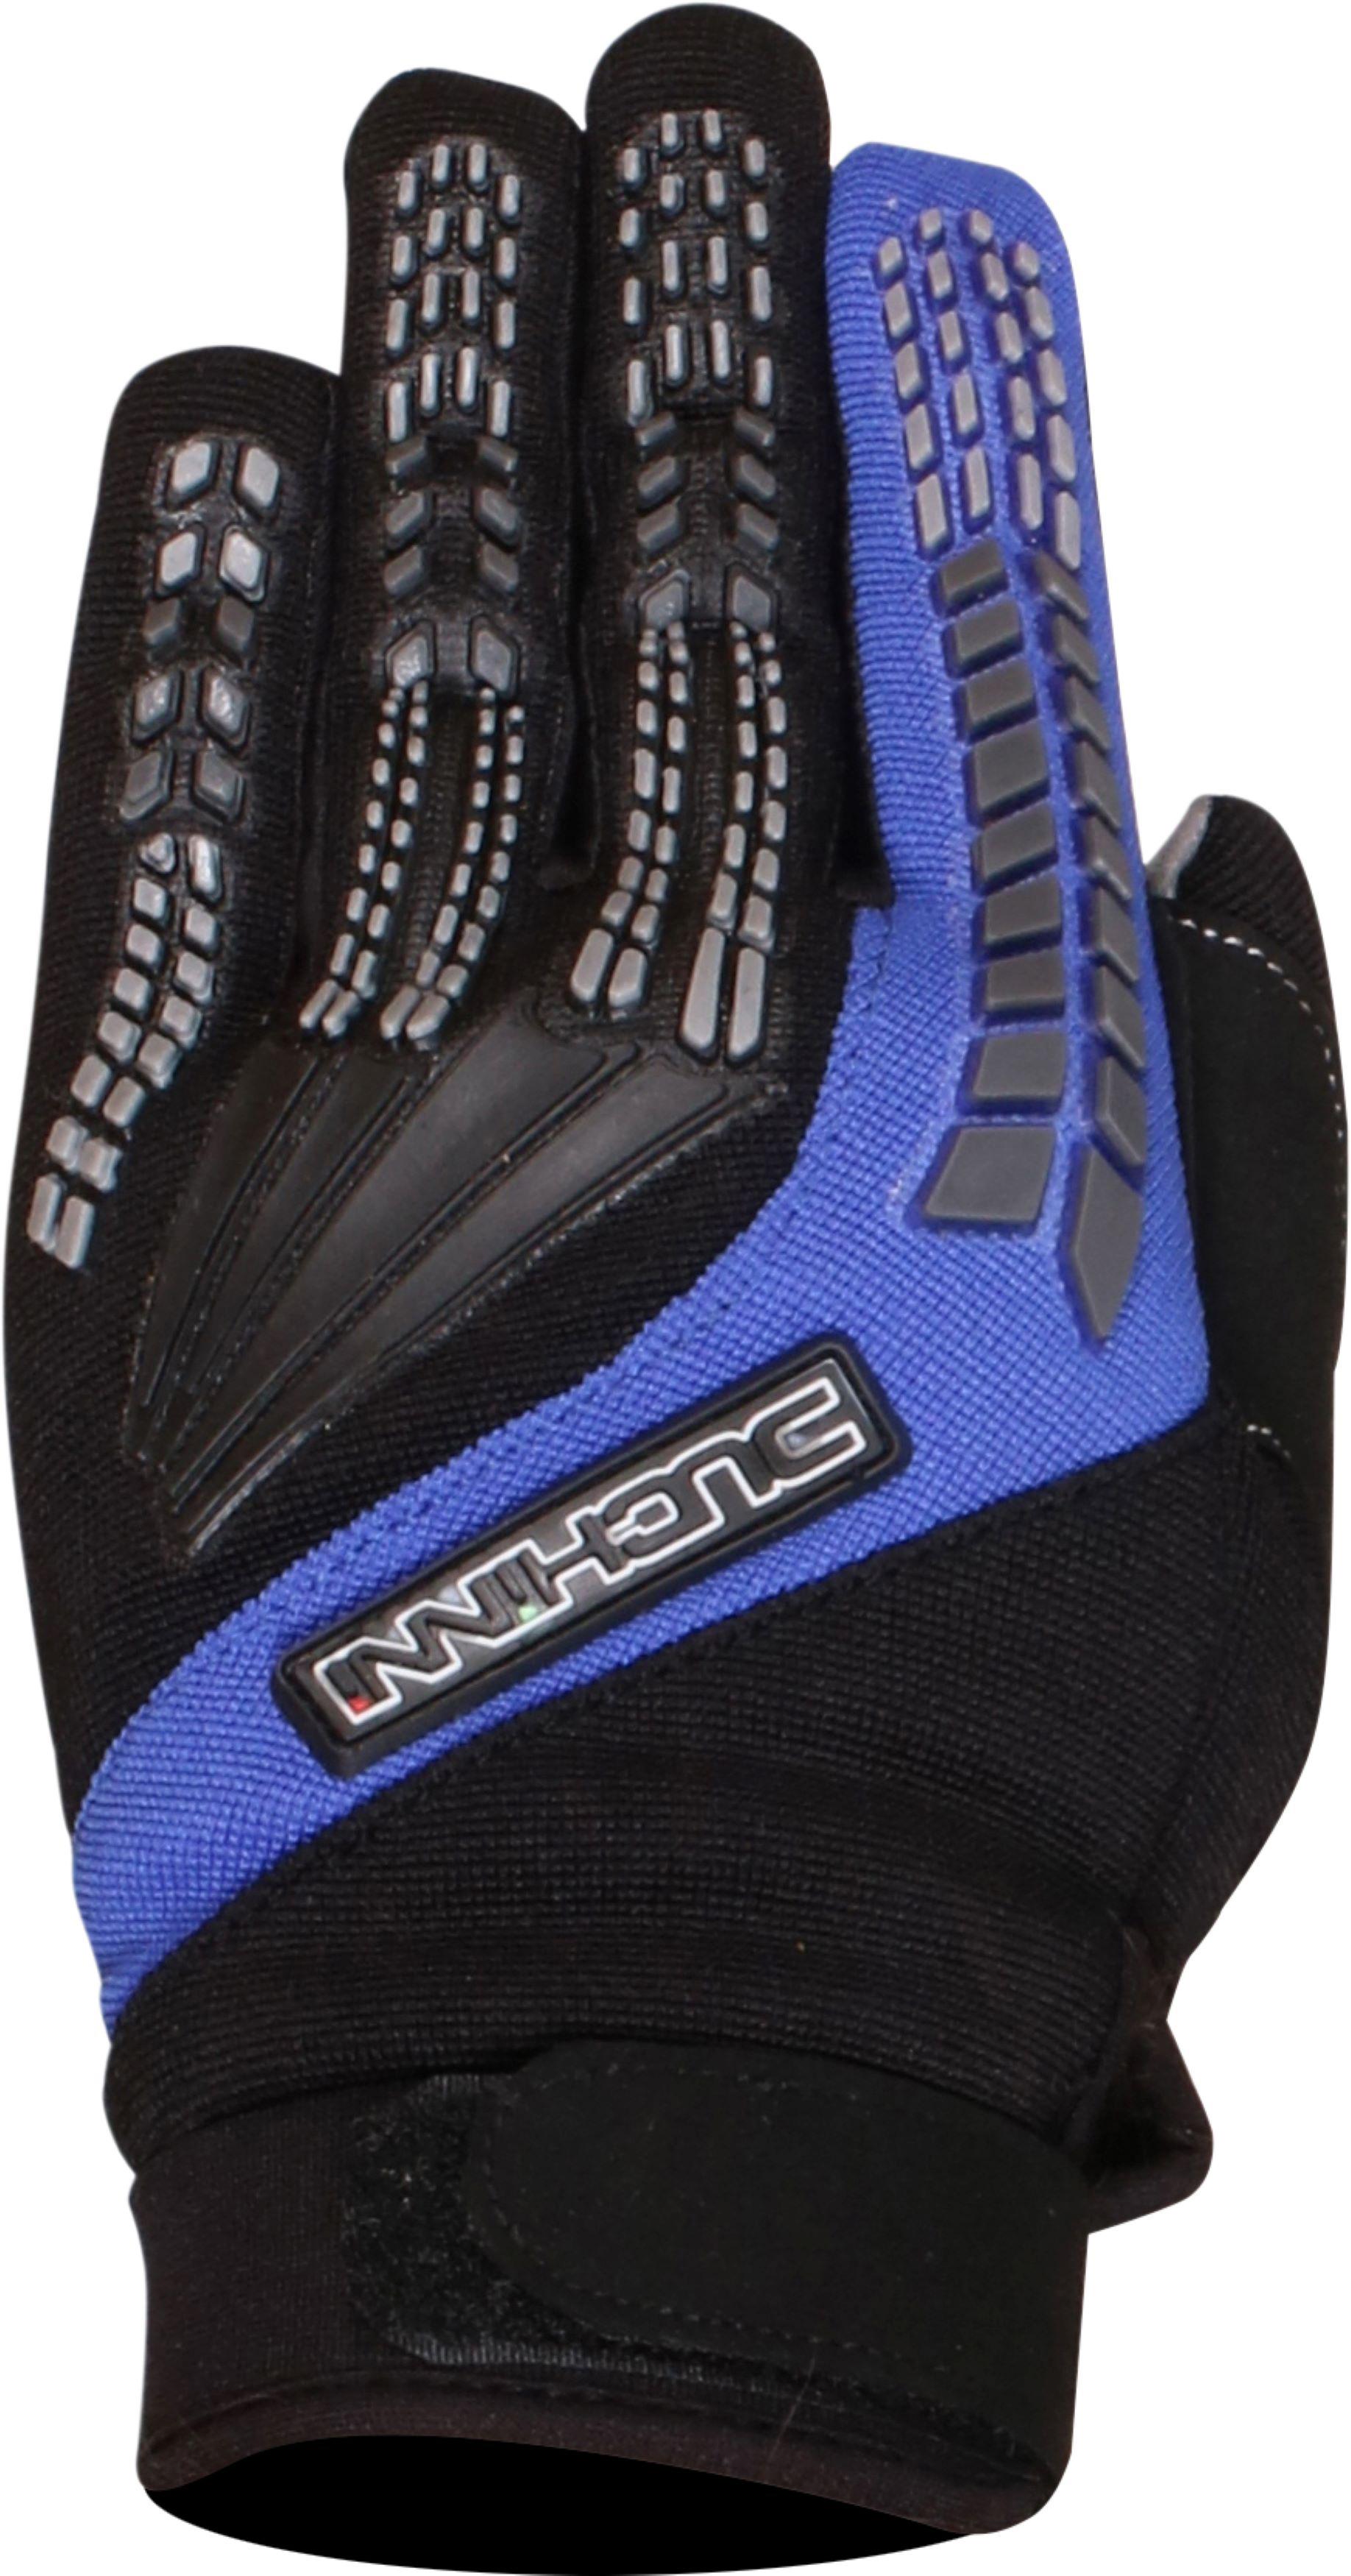 Duchinni Focus Motorcycle Gloves - Black And Blue, S